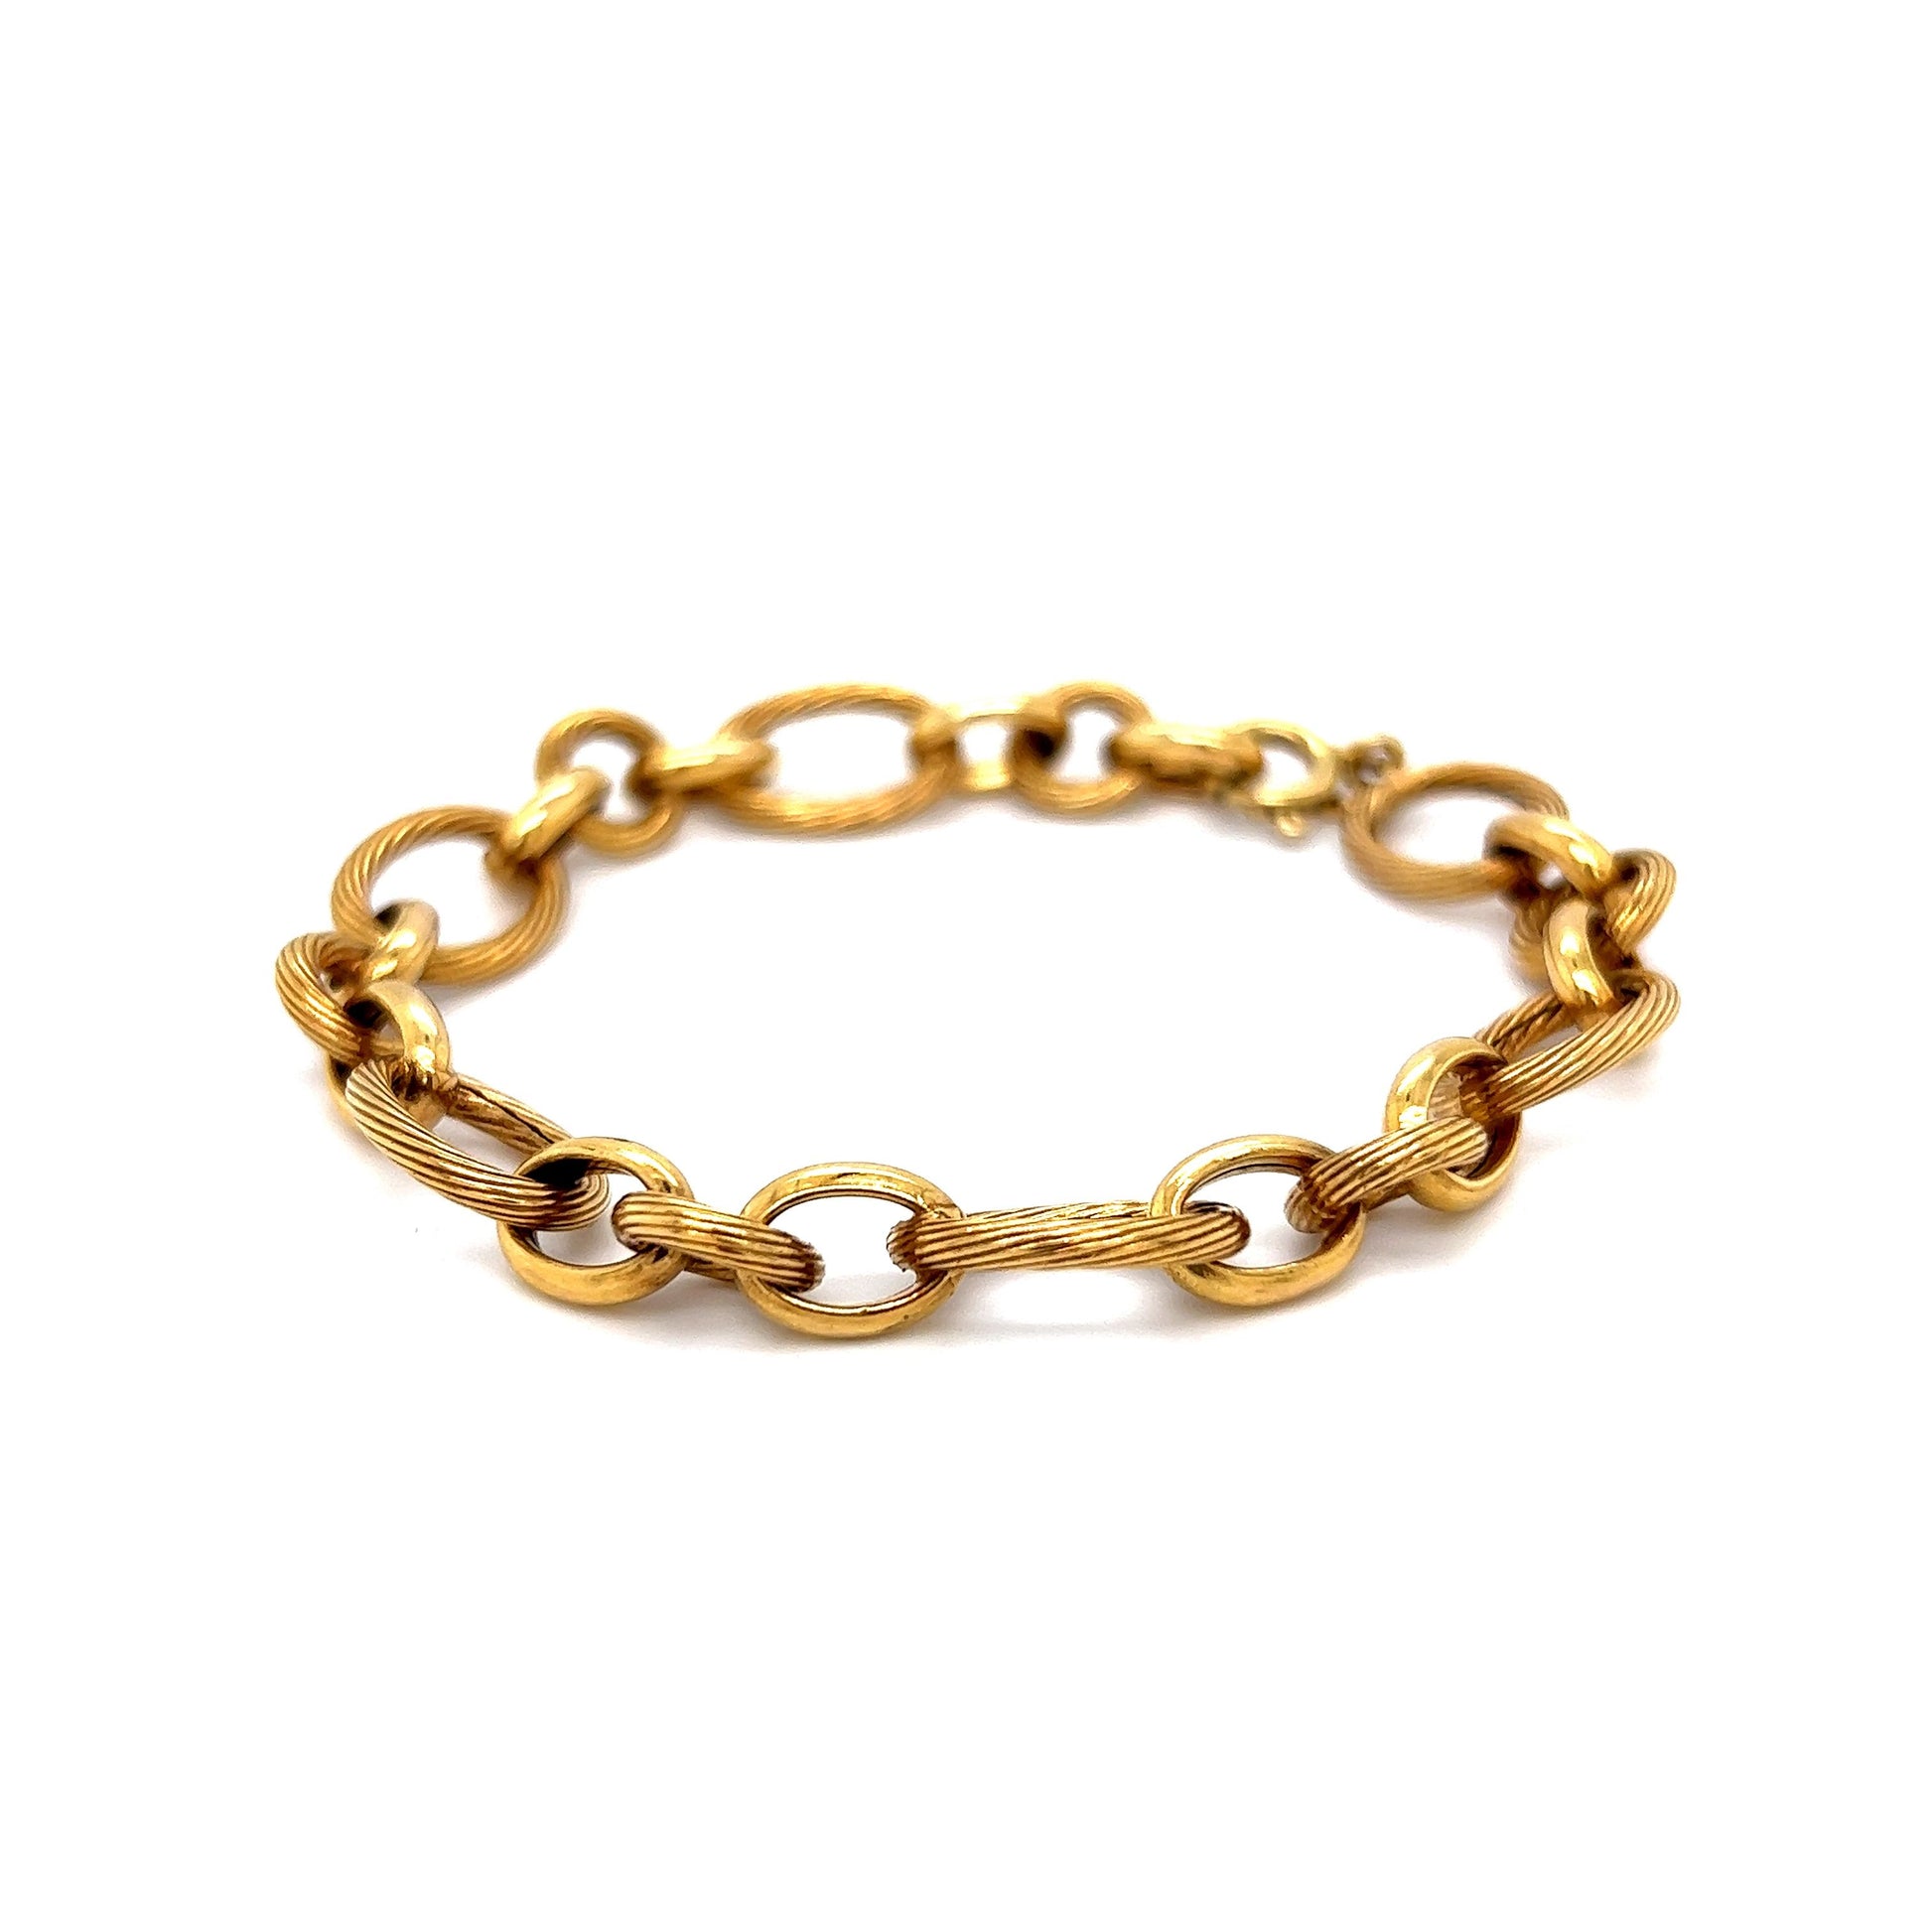 Textured Oval & Round Link Bracelet in 14k Yellow Gold